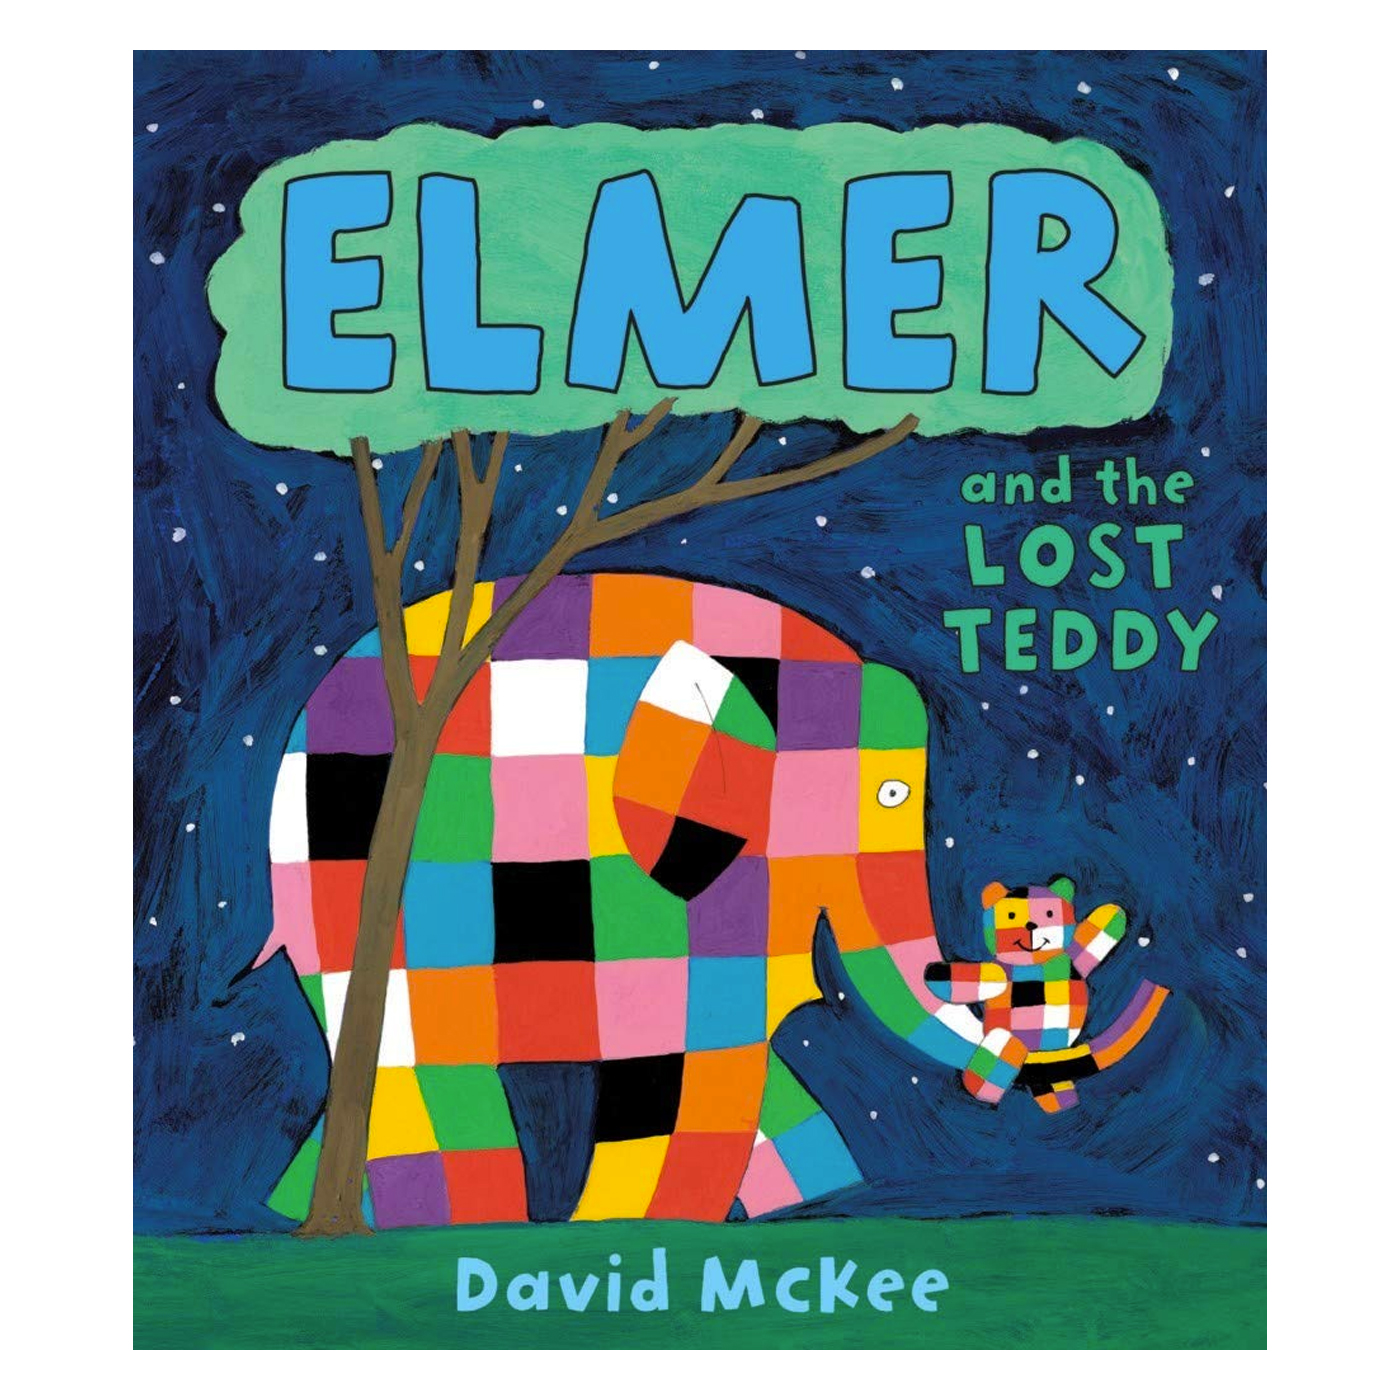  Elmer and the Lost Teddy